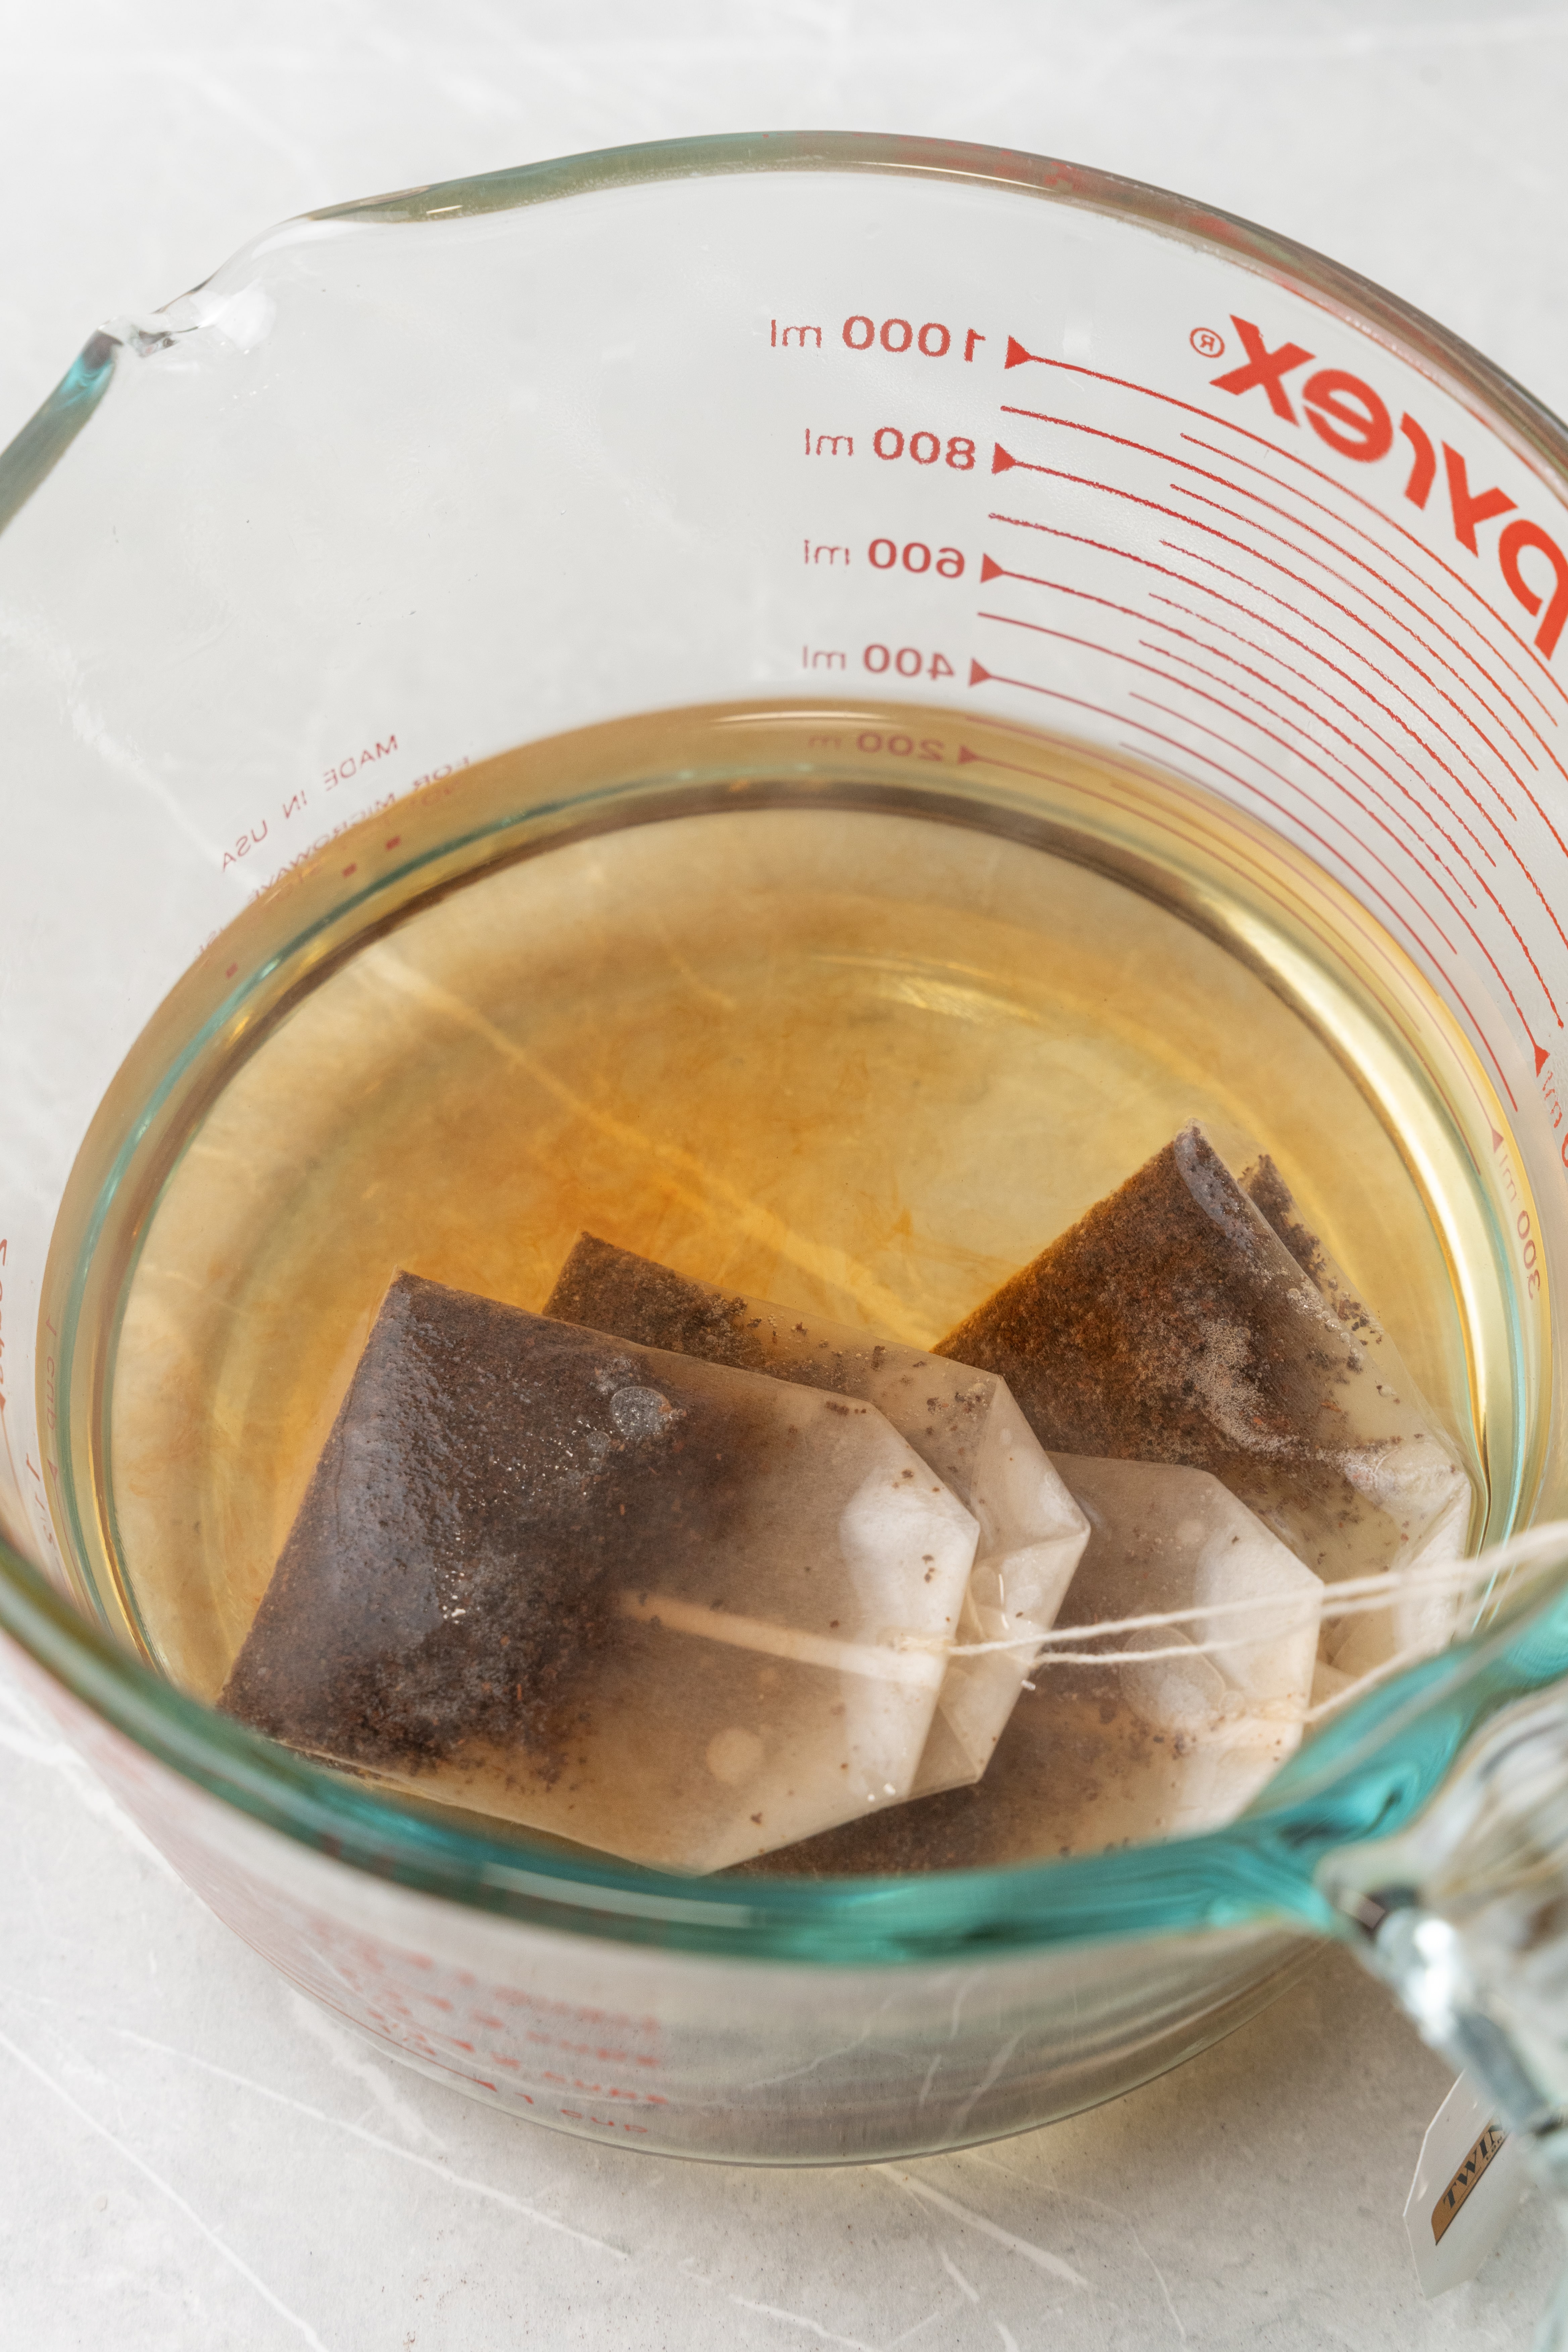 tea bags steeping in water in a glass measuring dish